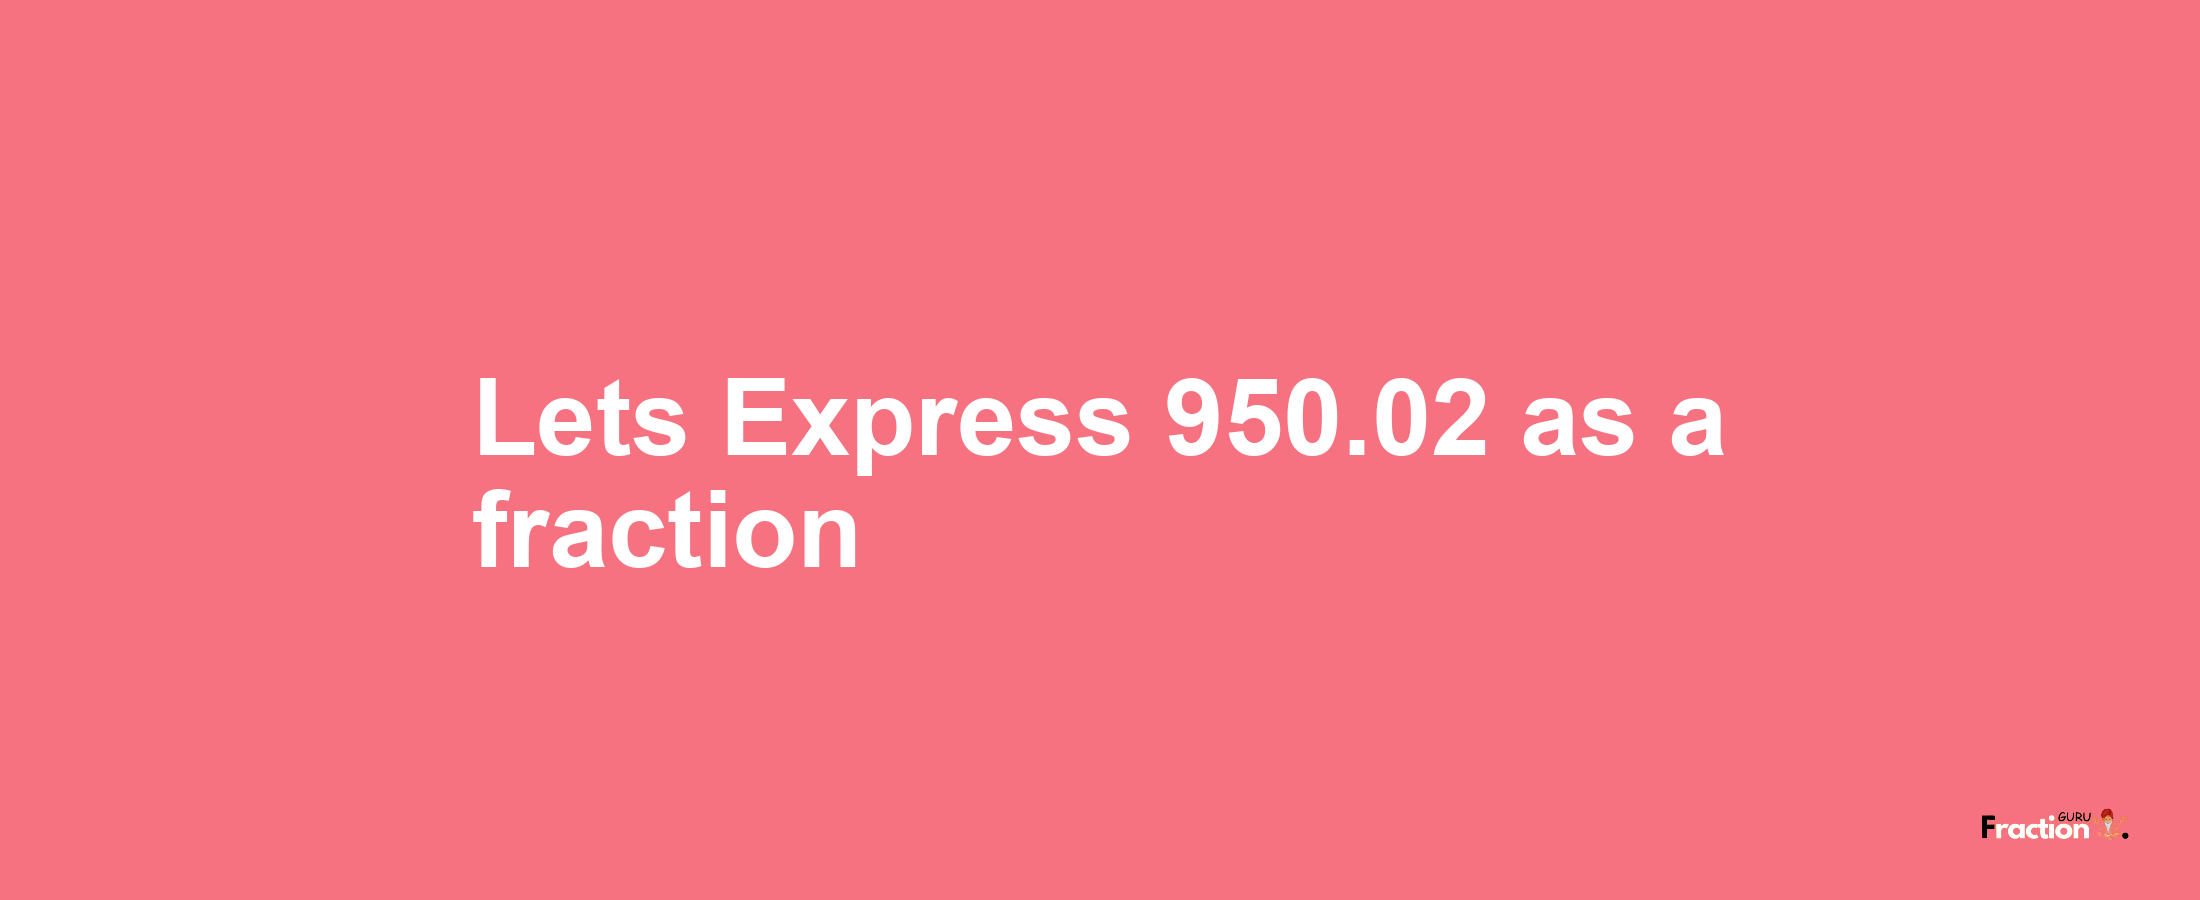 Lets Express 950.02 as afraction